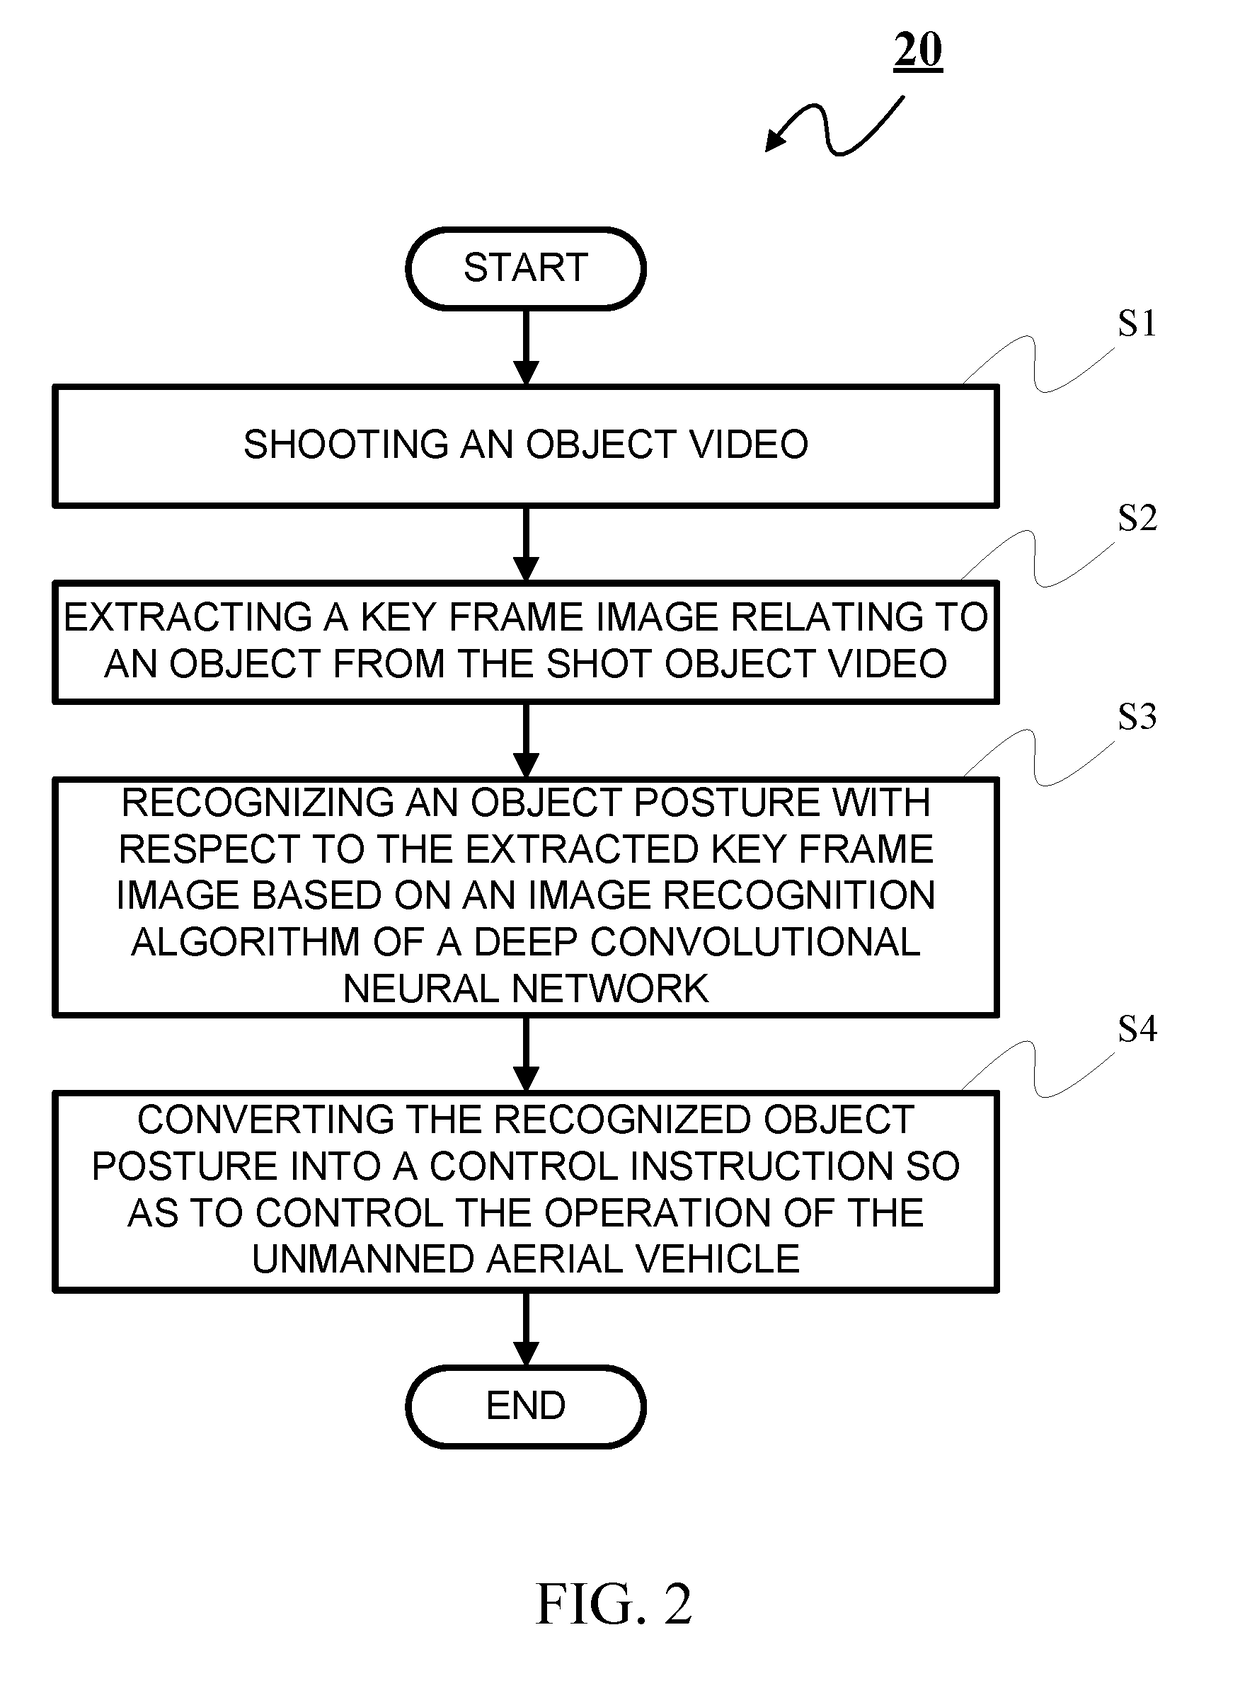 Unmanned Aerial Vehicle Interactive Apparatus and Method Based on Deep Learning Posture Estimation